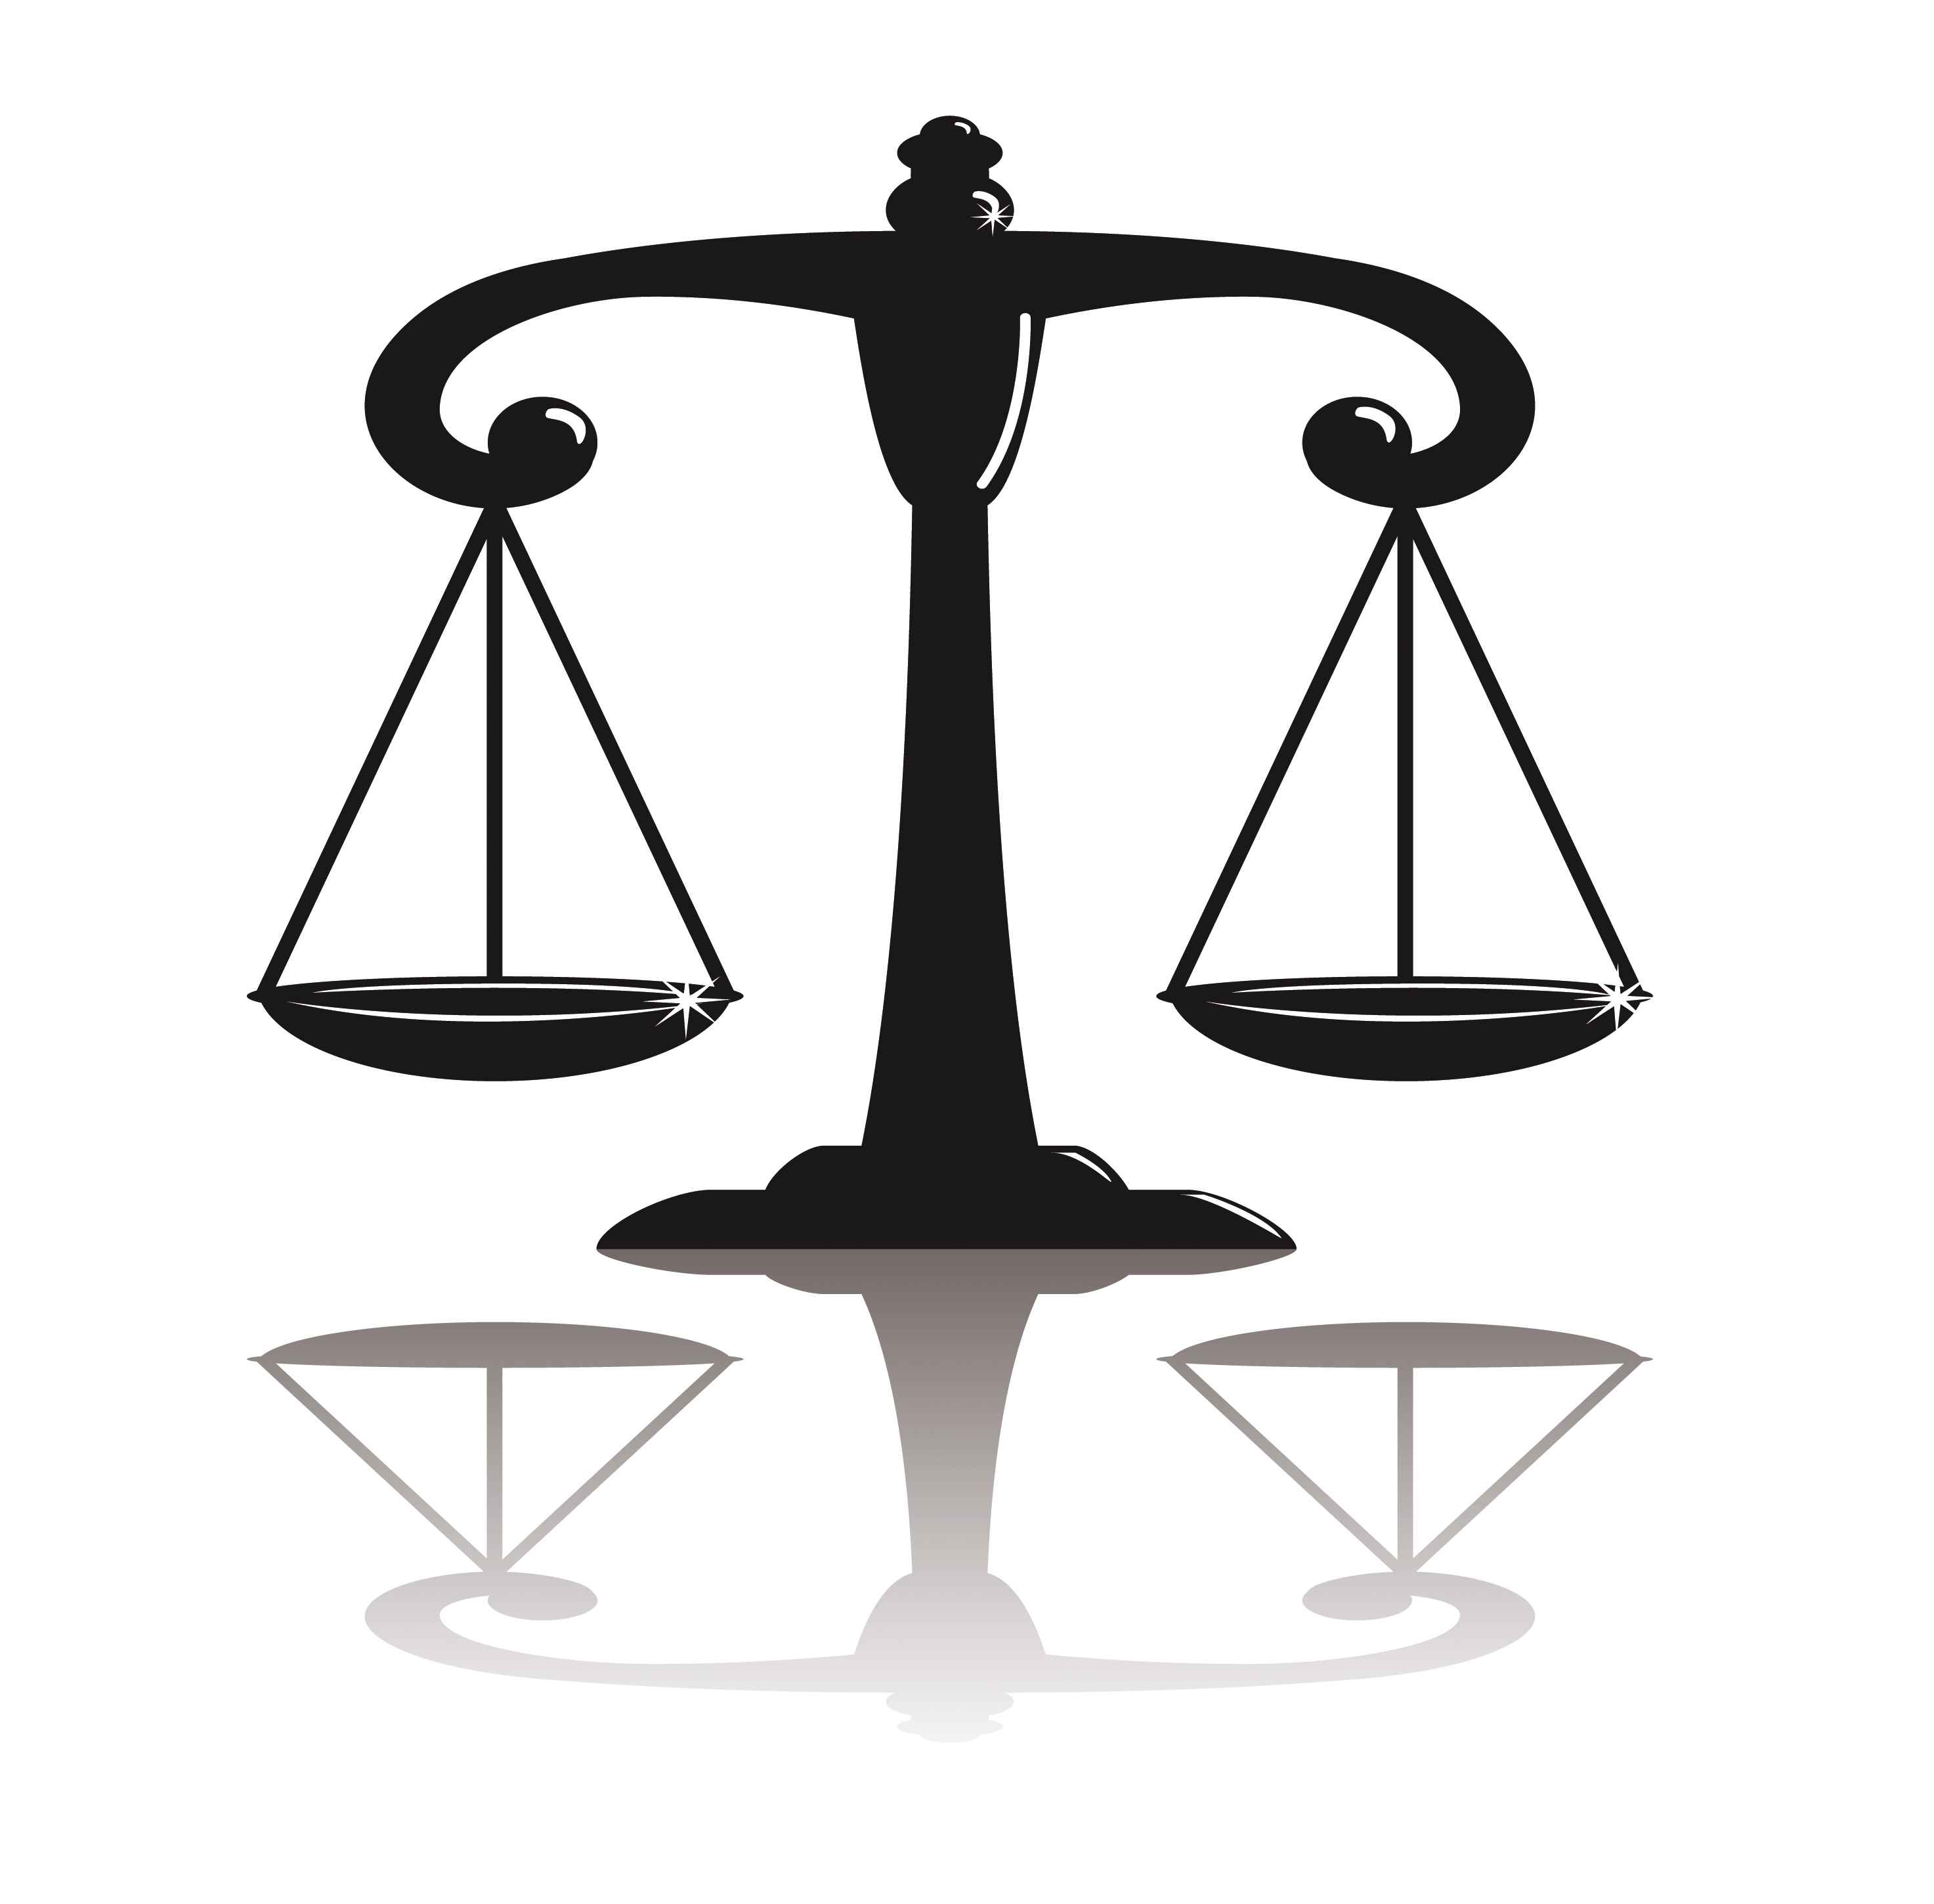 10 Justice Scale Clip Art Free Cliparts That You Can Download To You